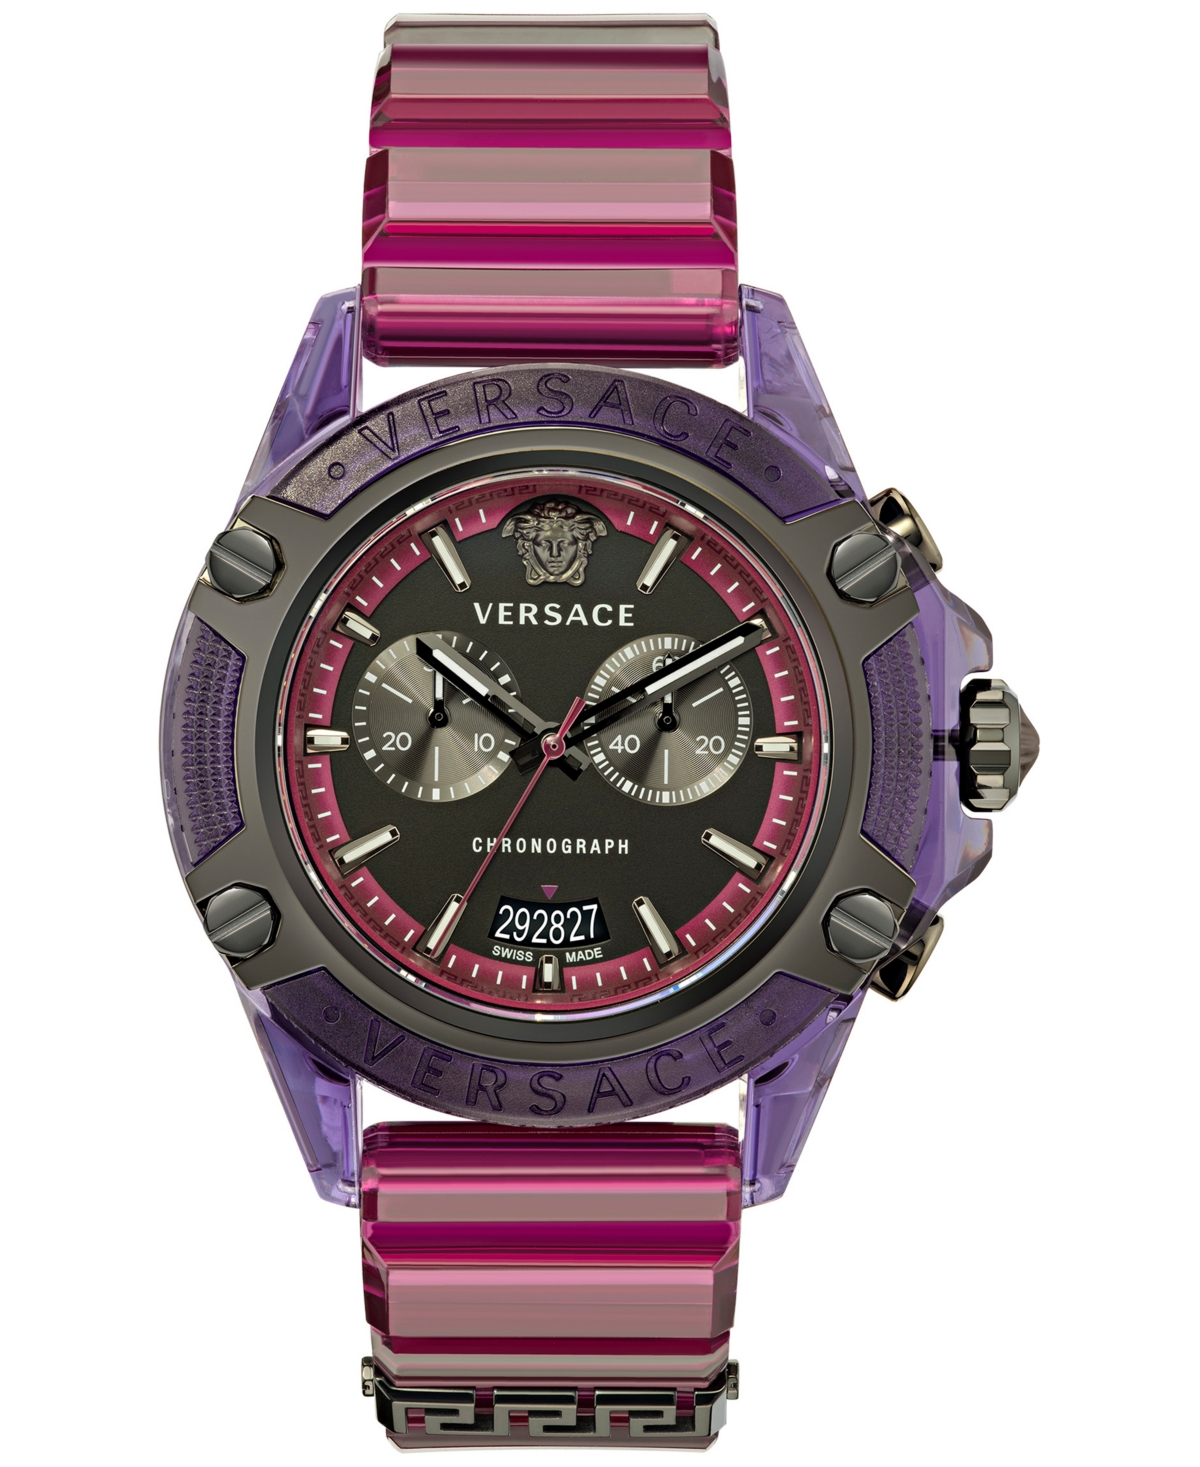 VERSACE MEN'S SWISS CHRONOGRAPH ICON ACTIVE TRANSPARENT PURPLE SILICONE STRAP WATCH 44MM